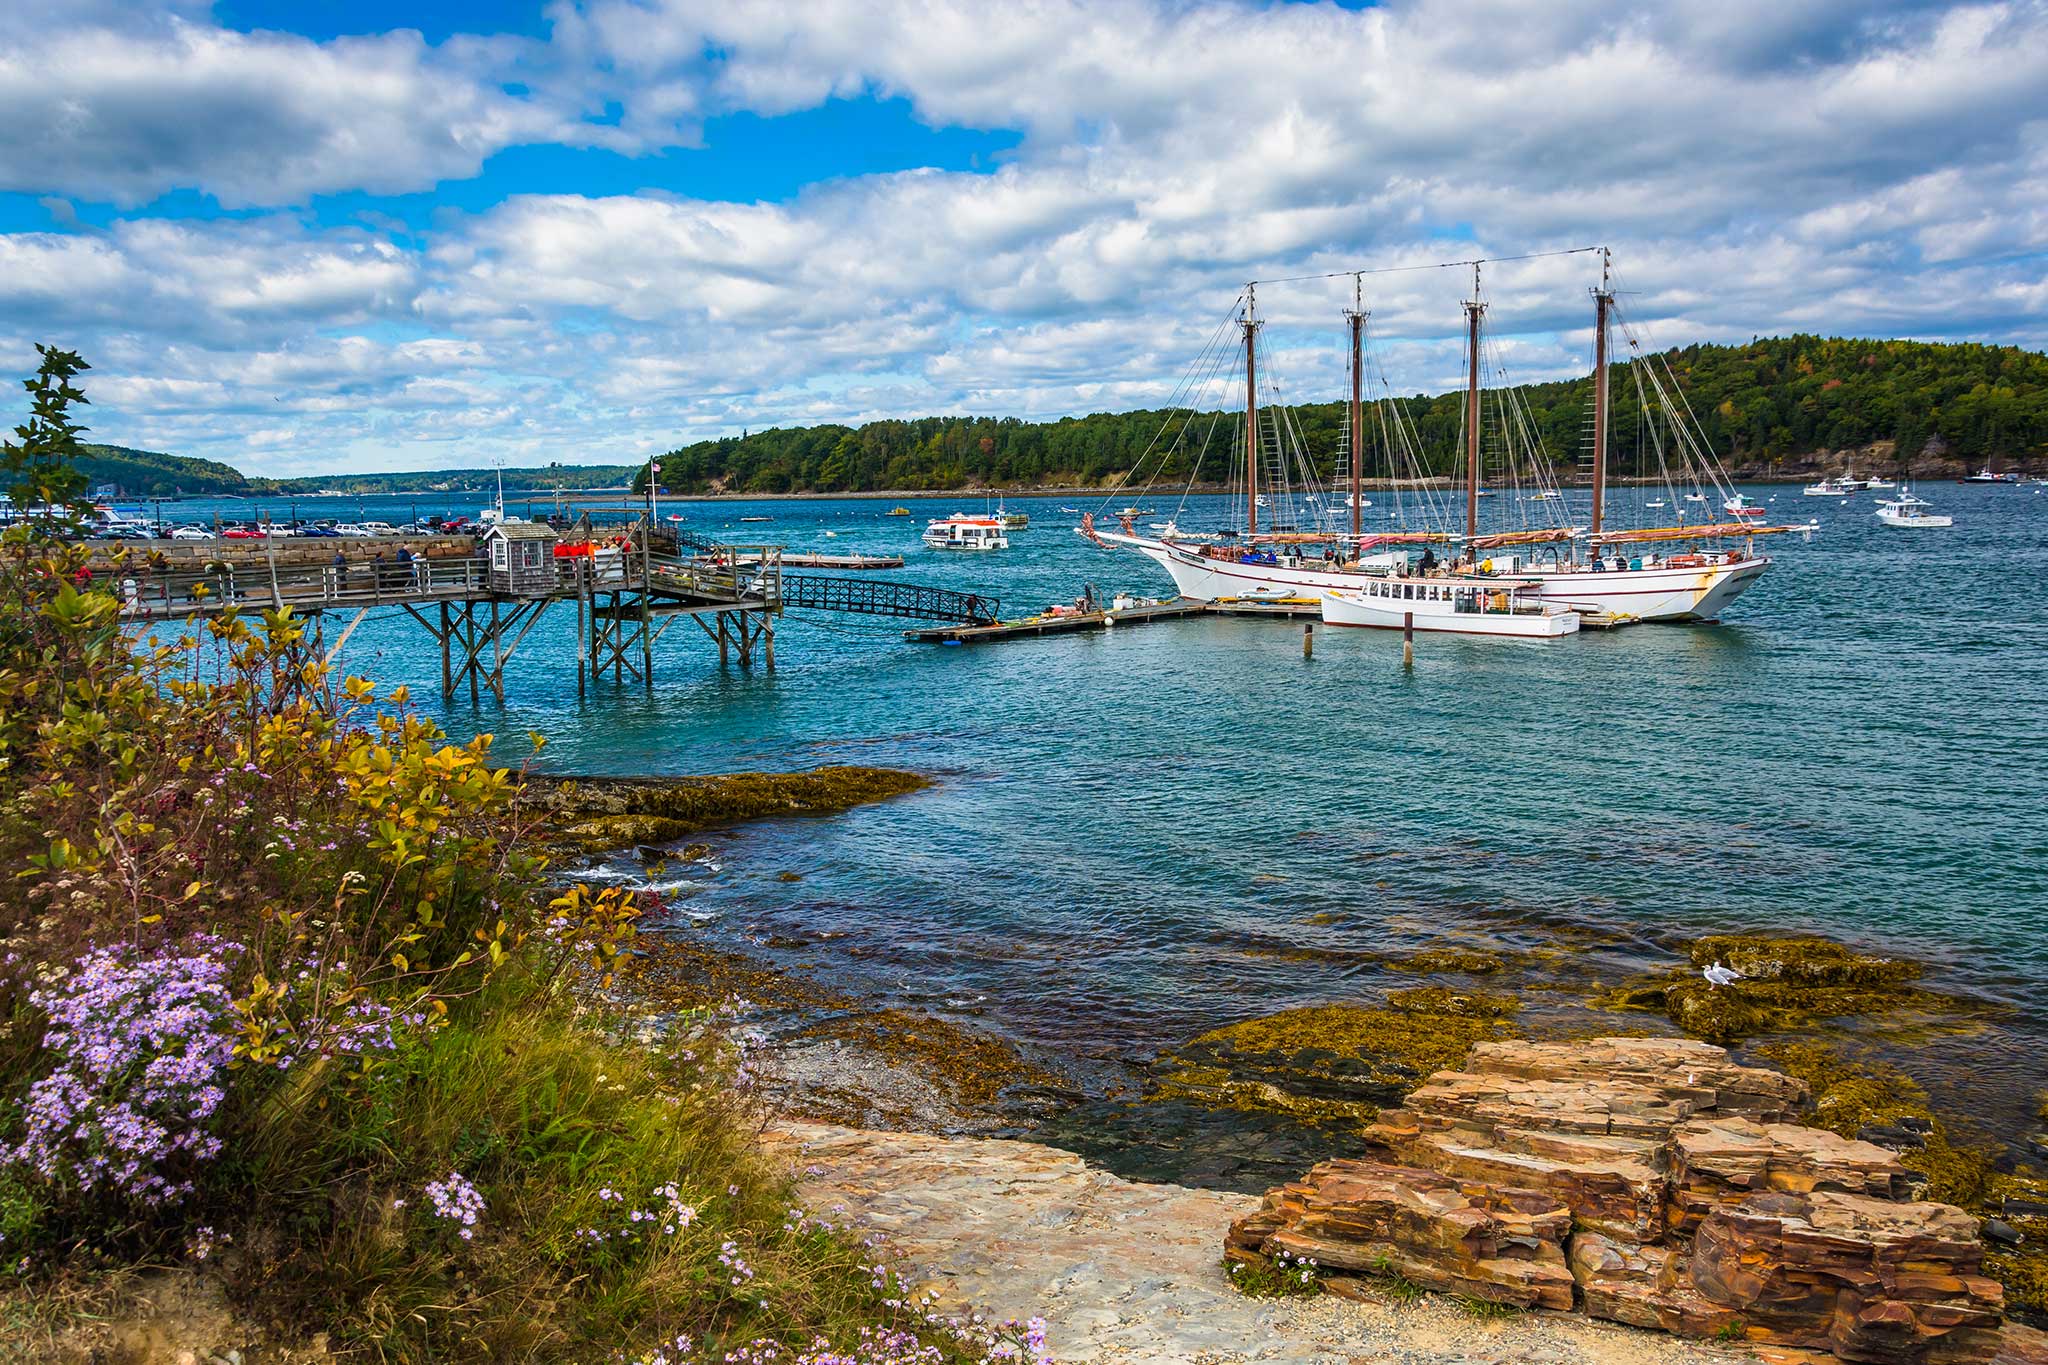 A picturesque New England harbor, where a large sailing ship is tied to a weathered pier surrounded by small boats navigating the water. Lush greenery and blooming wildflowers add vibrant colors to the rocky shoreline under a partly cloudy sky.